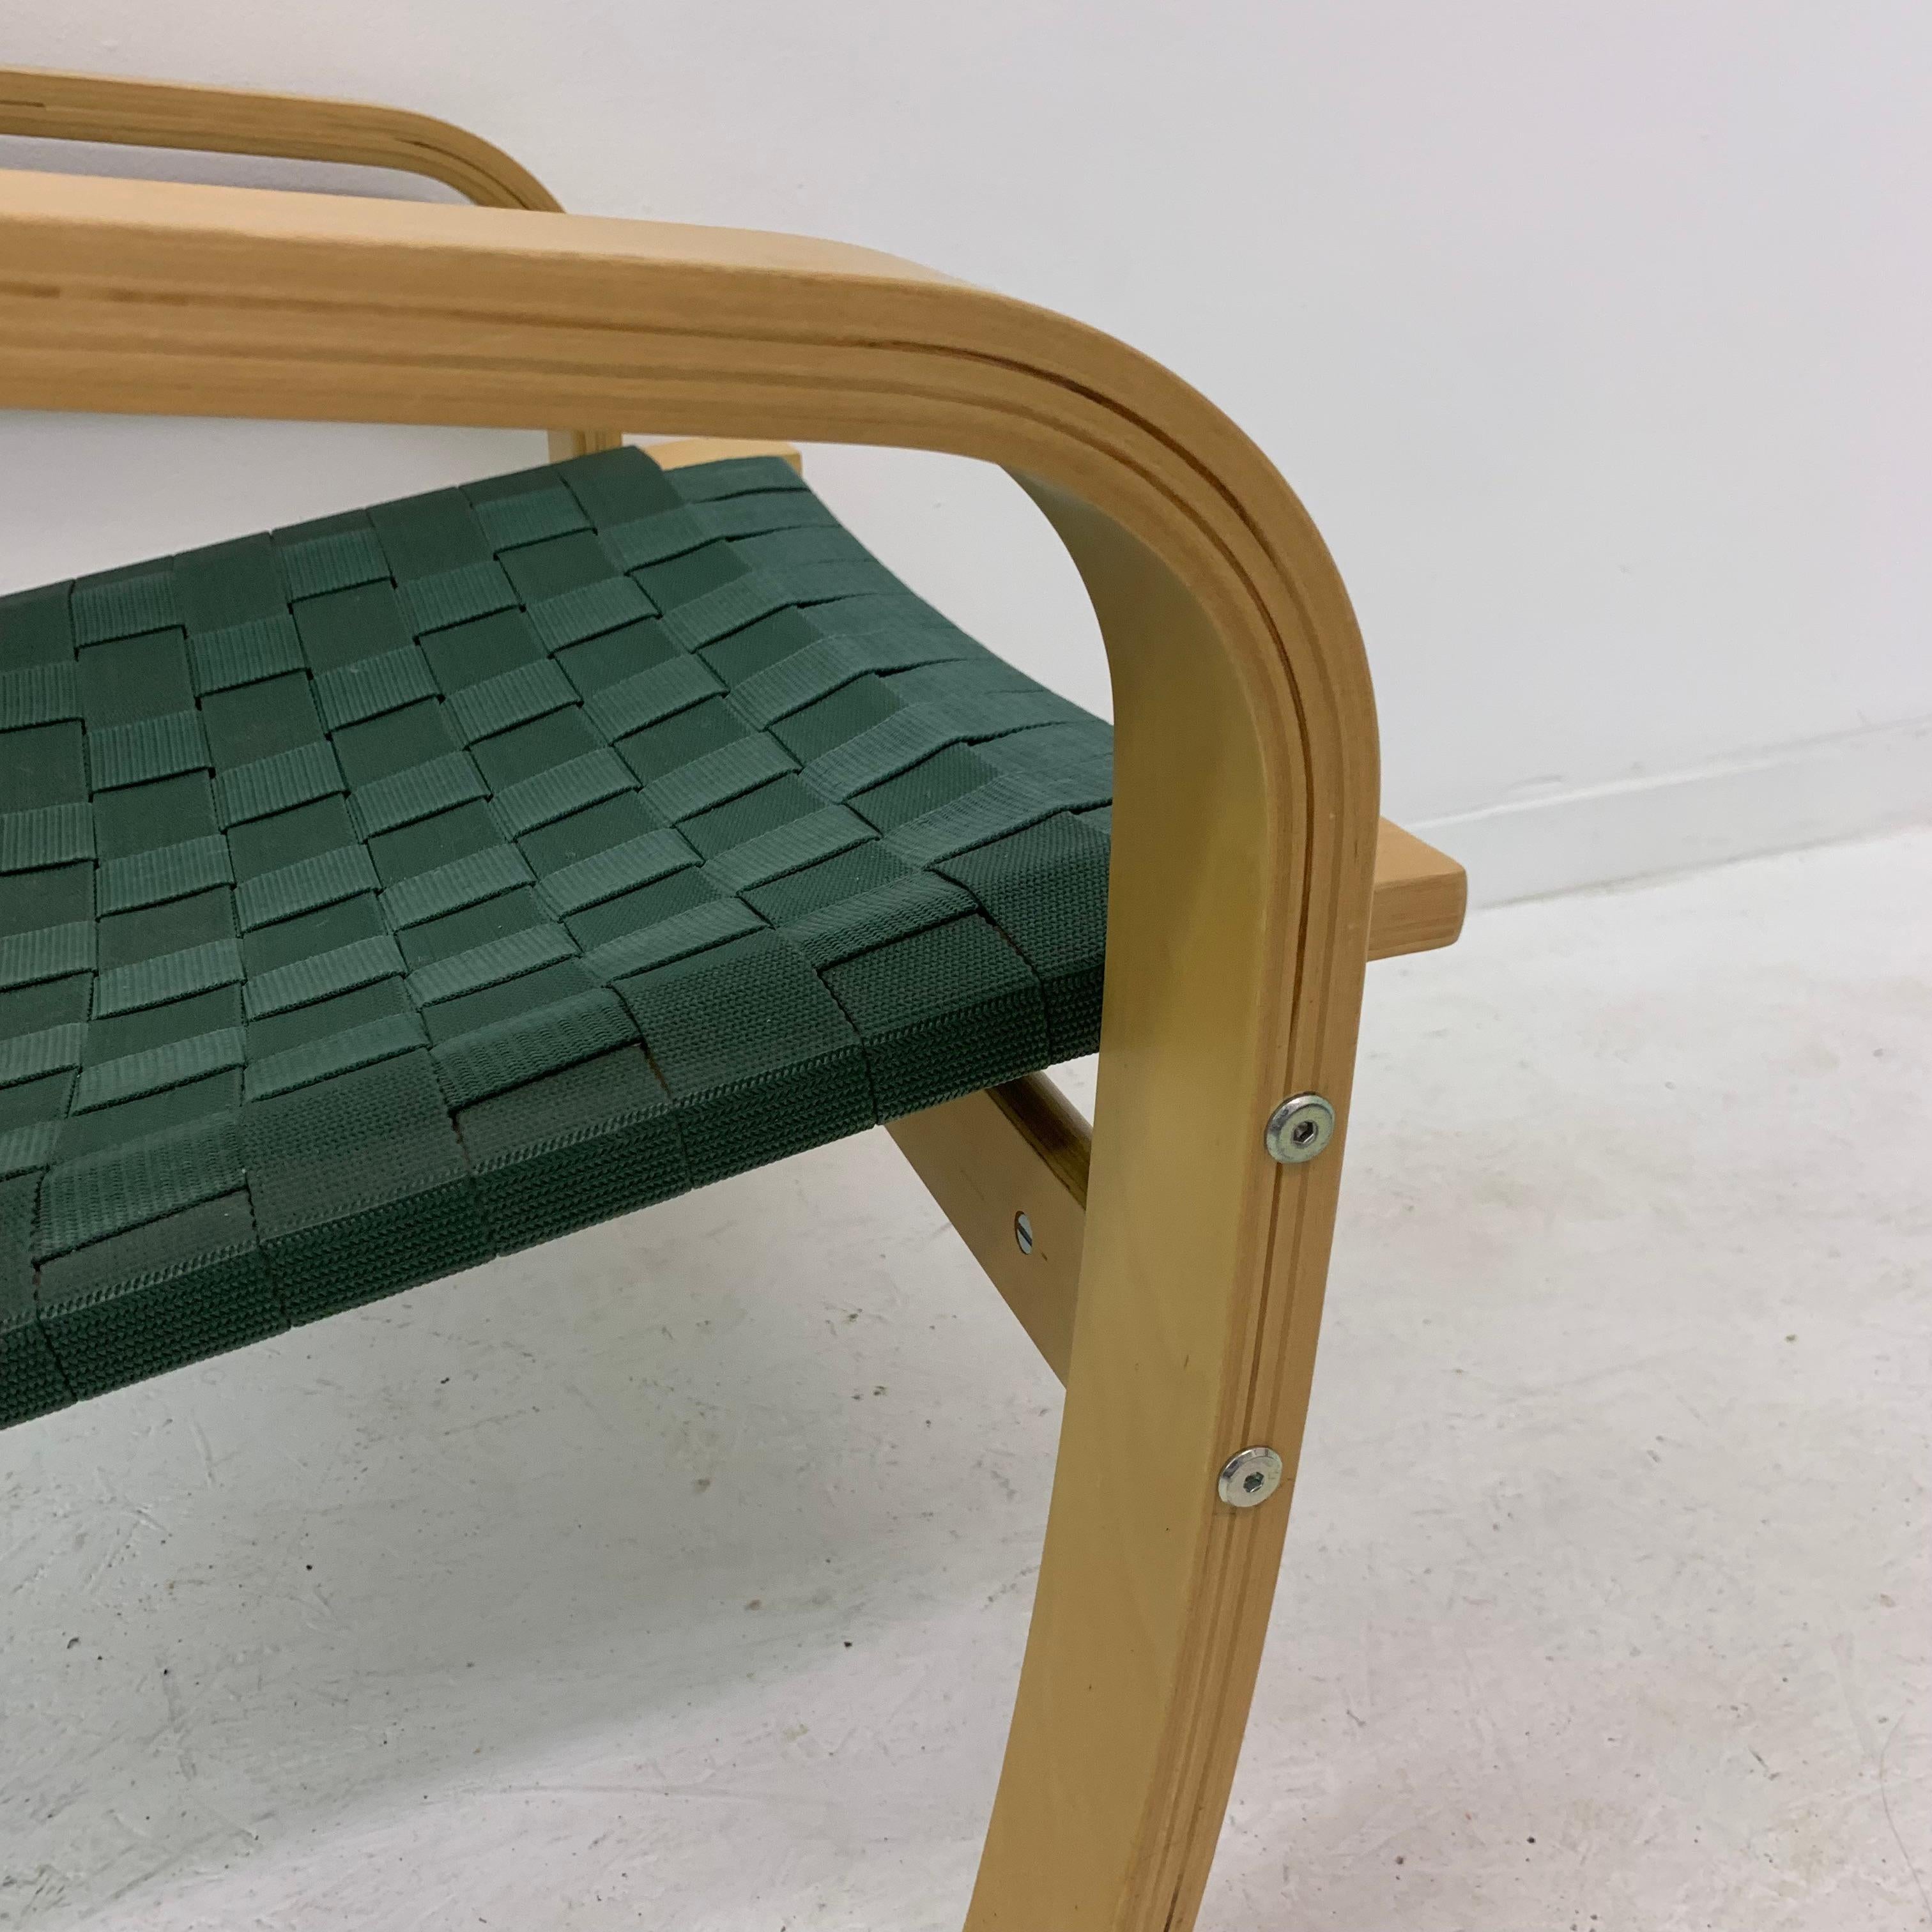 Limited Edition Aalto Tribute Points Chair by Noboru Nakamura for Ikea, 1999 For Sale 6